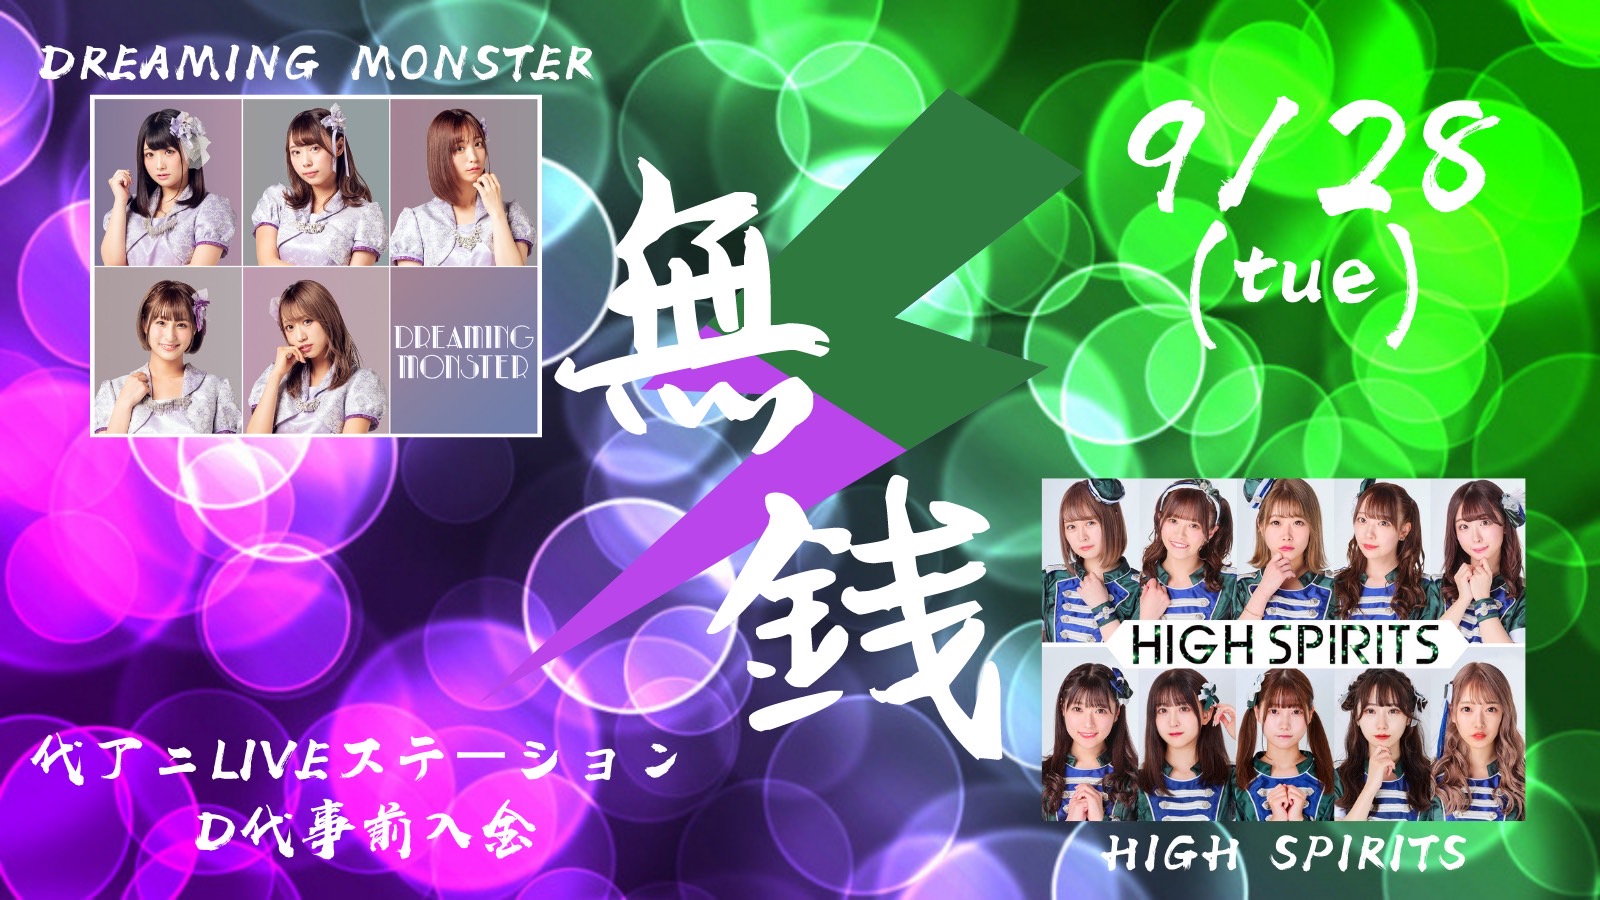 DREAMING MONSTER × HIGH SPRITS 緊急無銭2マン